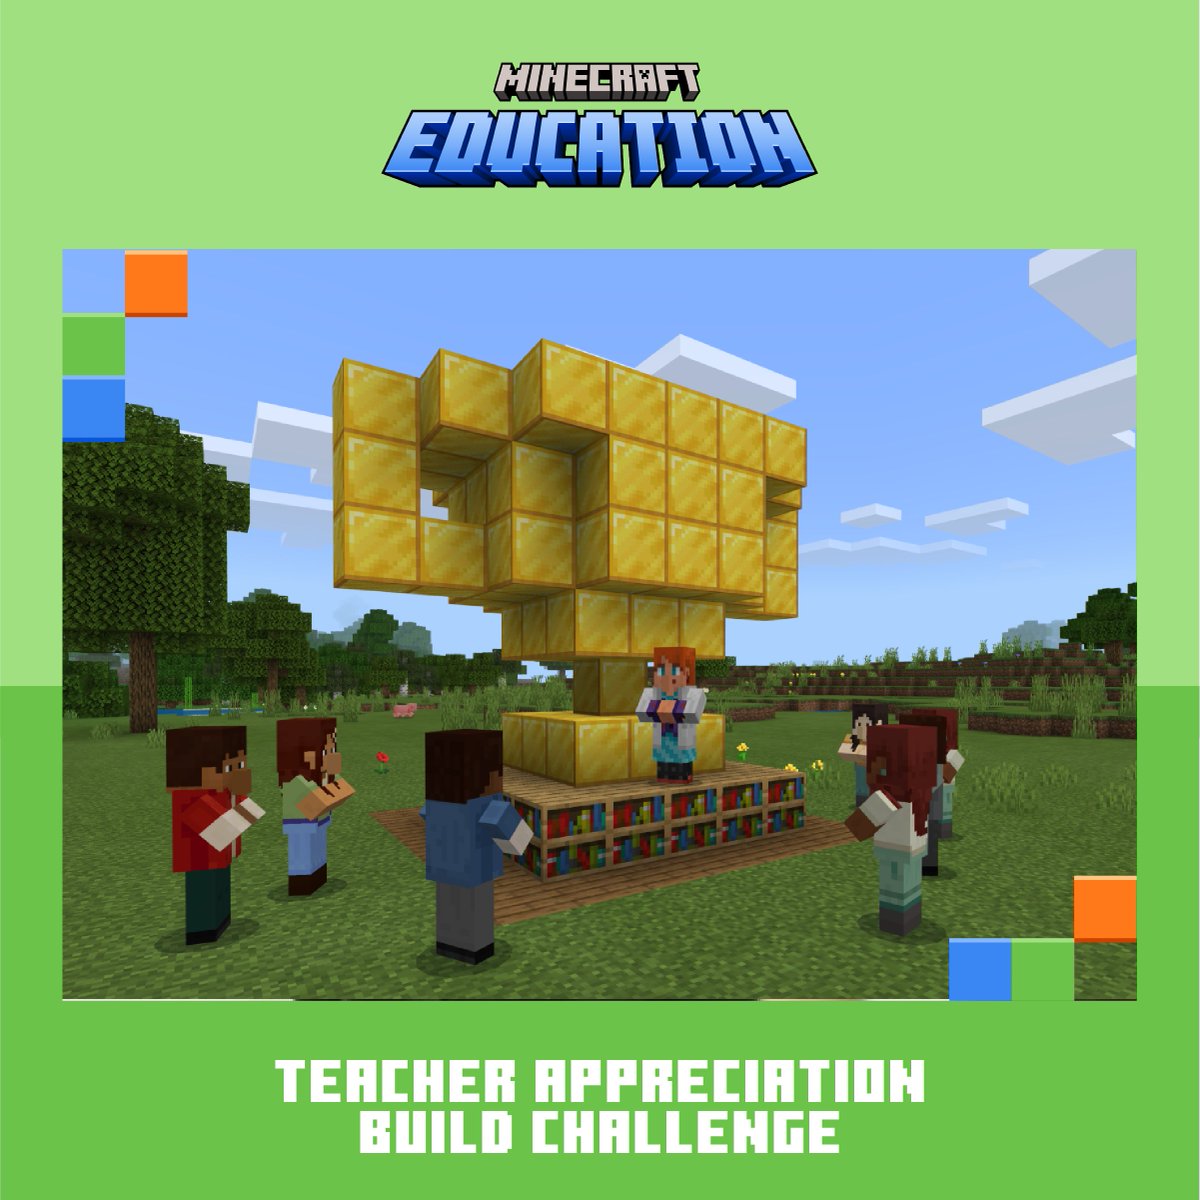 Hey parents! 🌟Encourage your kids to thank their amazing teachers for #TeacherAppreciationWeek with this Minecraft Education build challenge. 🏫 Share their creations with the tags #ThankaTeacher and #MinecraftEdu to join the celebration! 📎msft.it/6010Yy9fQ